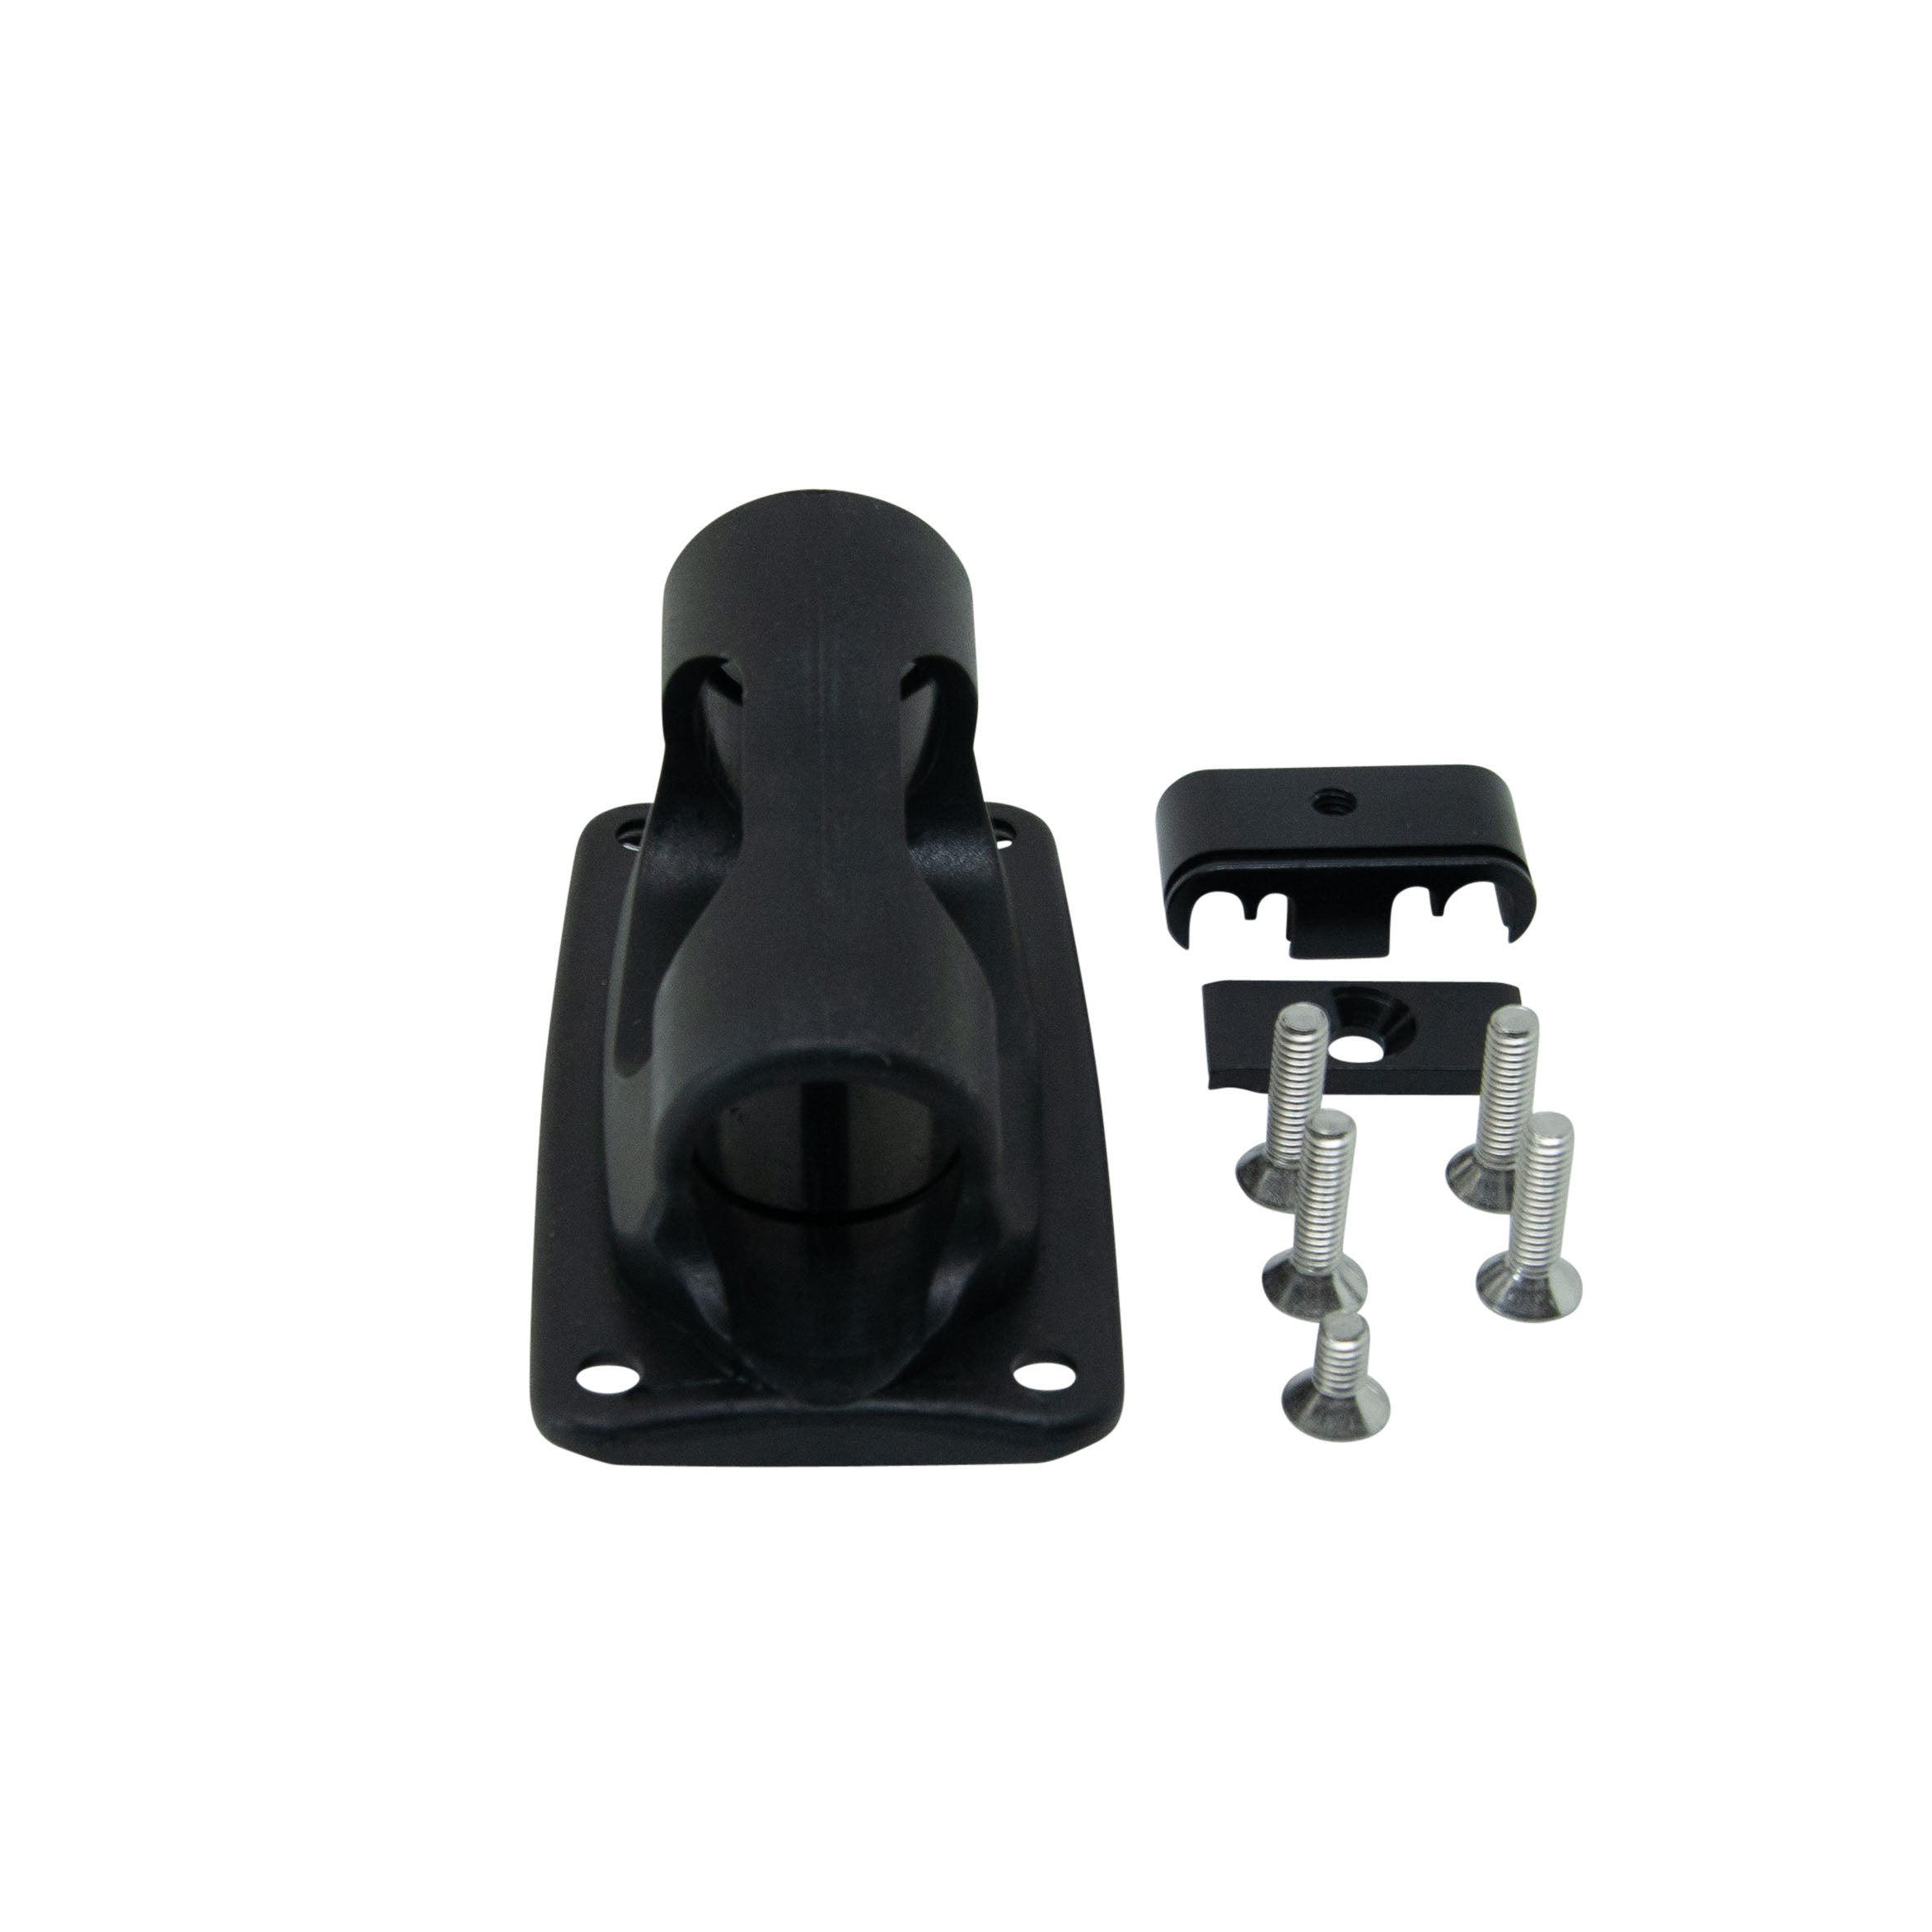 Downtube DI2/Cables Port Cover Kit